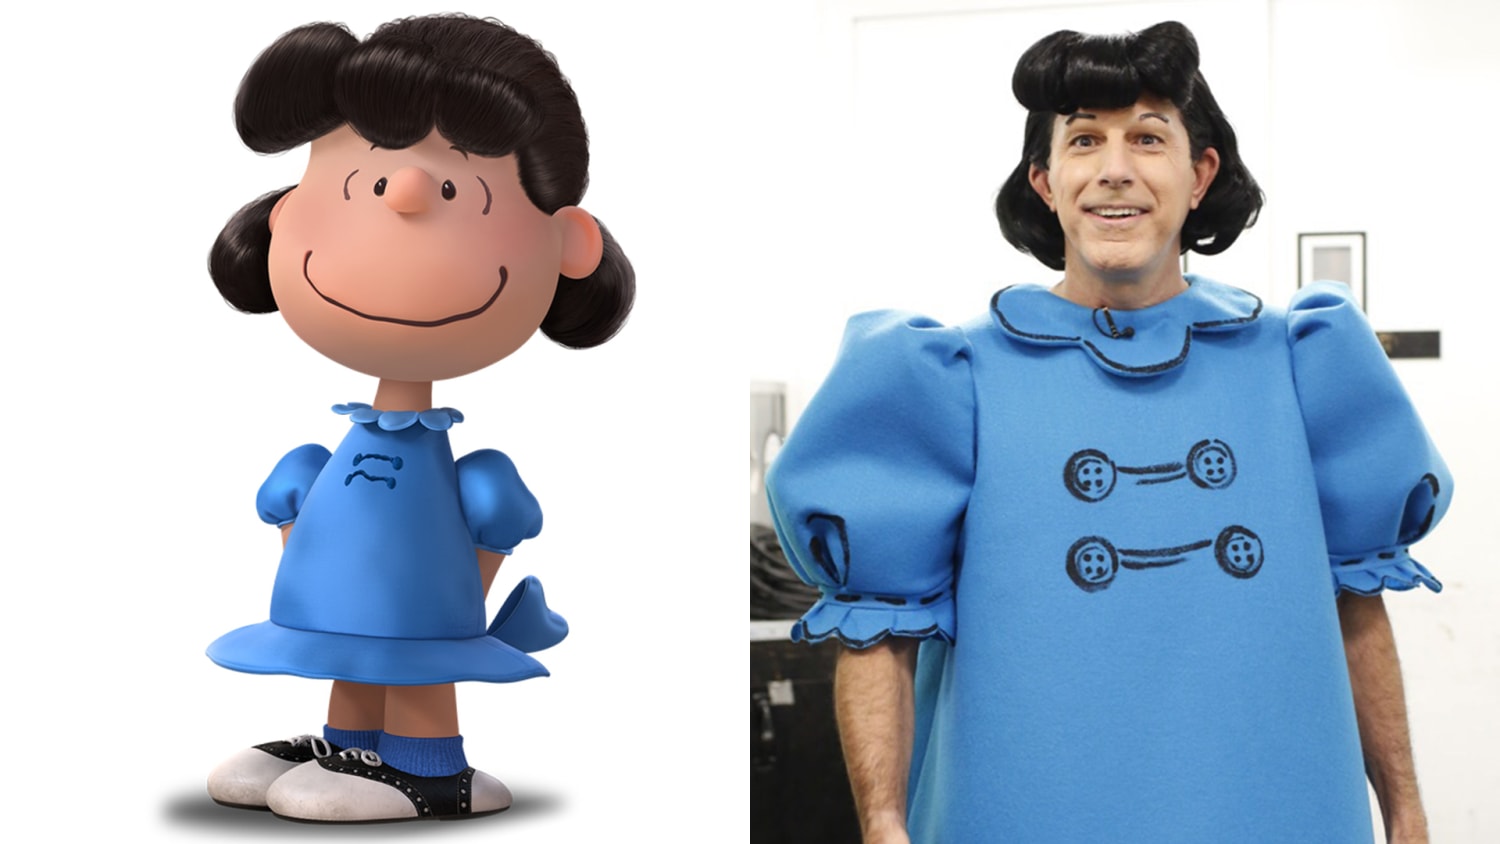 Lucy van Pelt Costume | Carbon Costume Lucy Peanuts Inspired Dress Girls Dr...